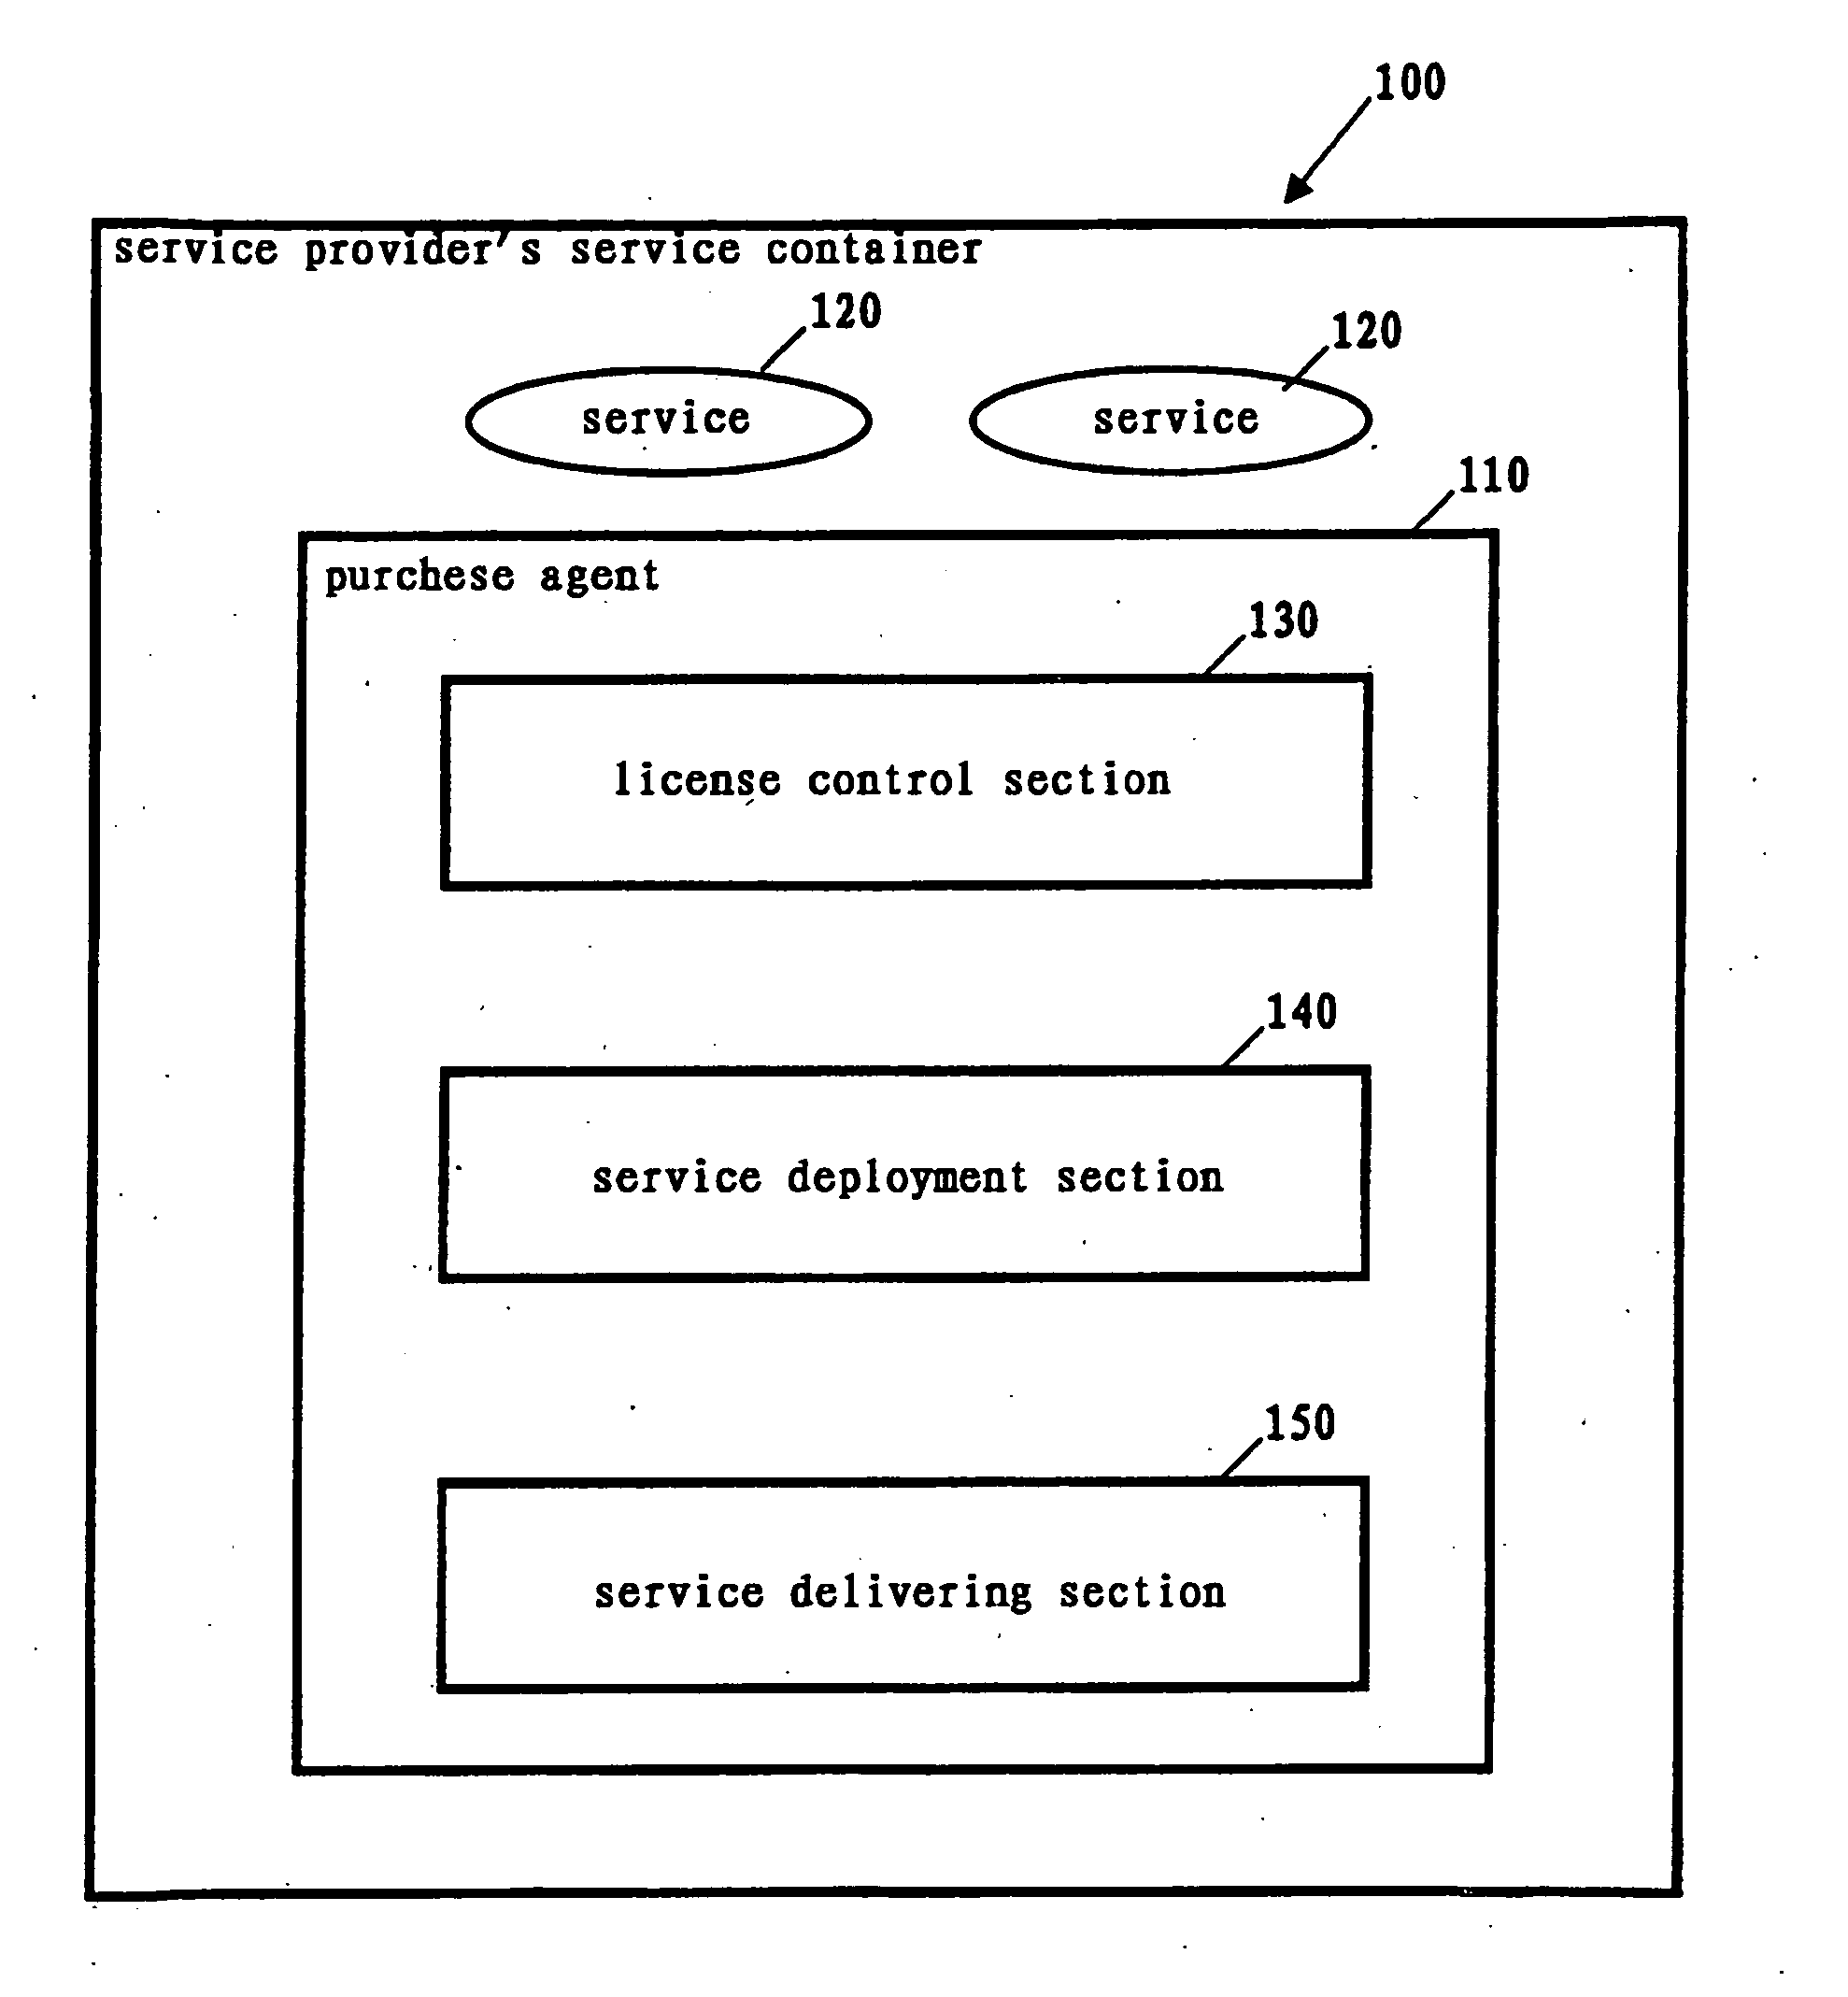 Enabling a software service provider to automatically obtain software service